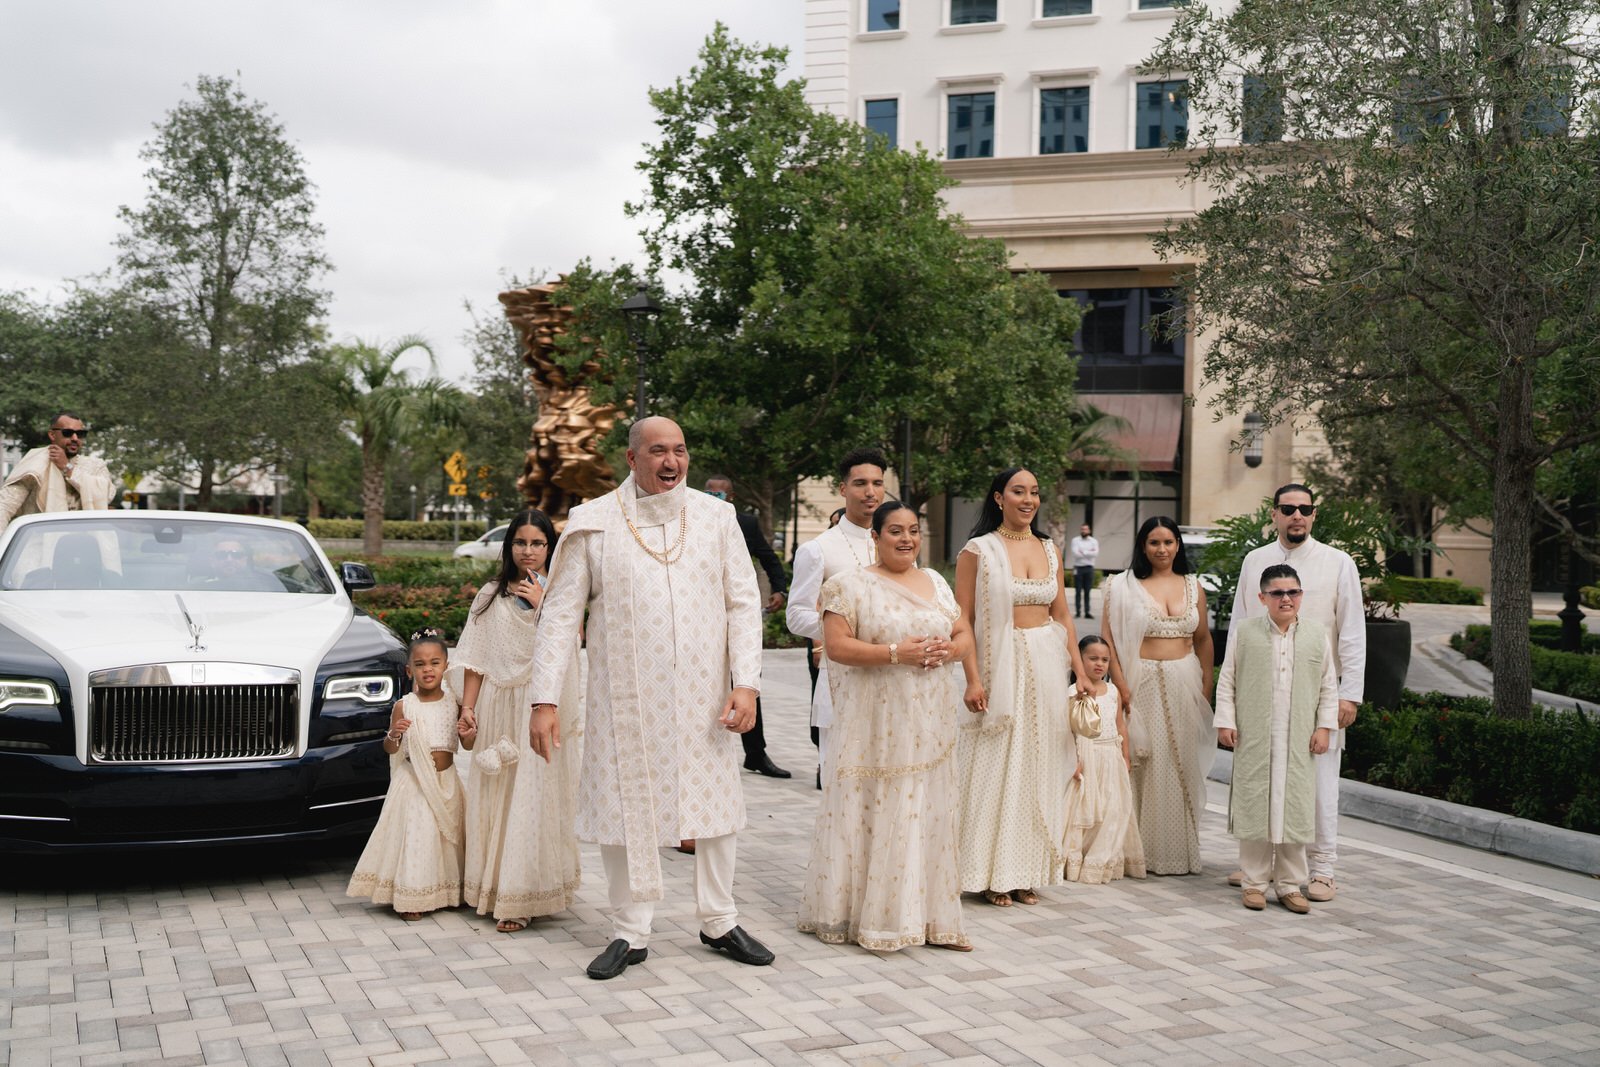 Luxury Indian Wedding in Miami Florida - Indian wedding photographer miami florida - michelle gonzalez photography - loews hotel in coral gables wedding-32.jpg